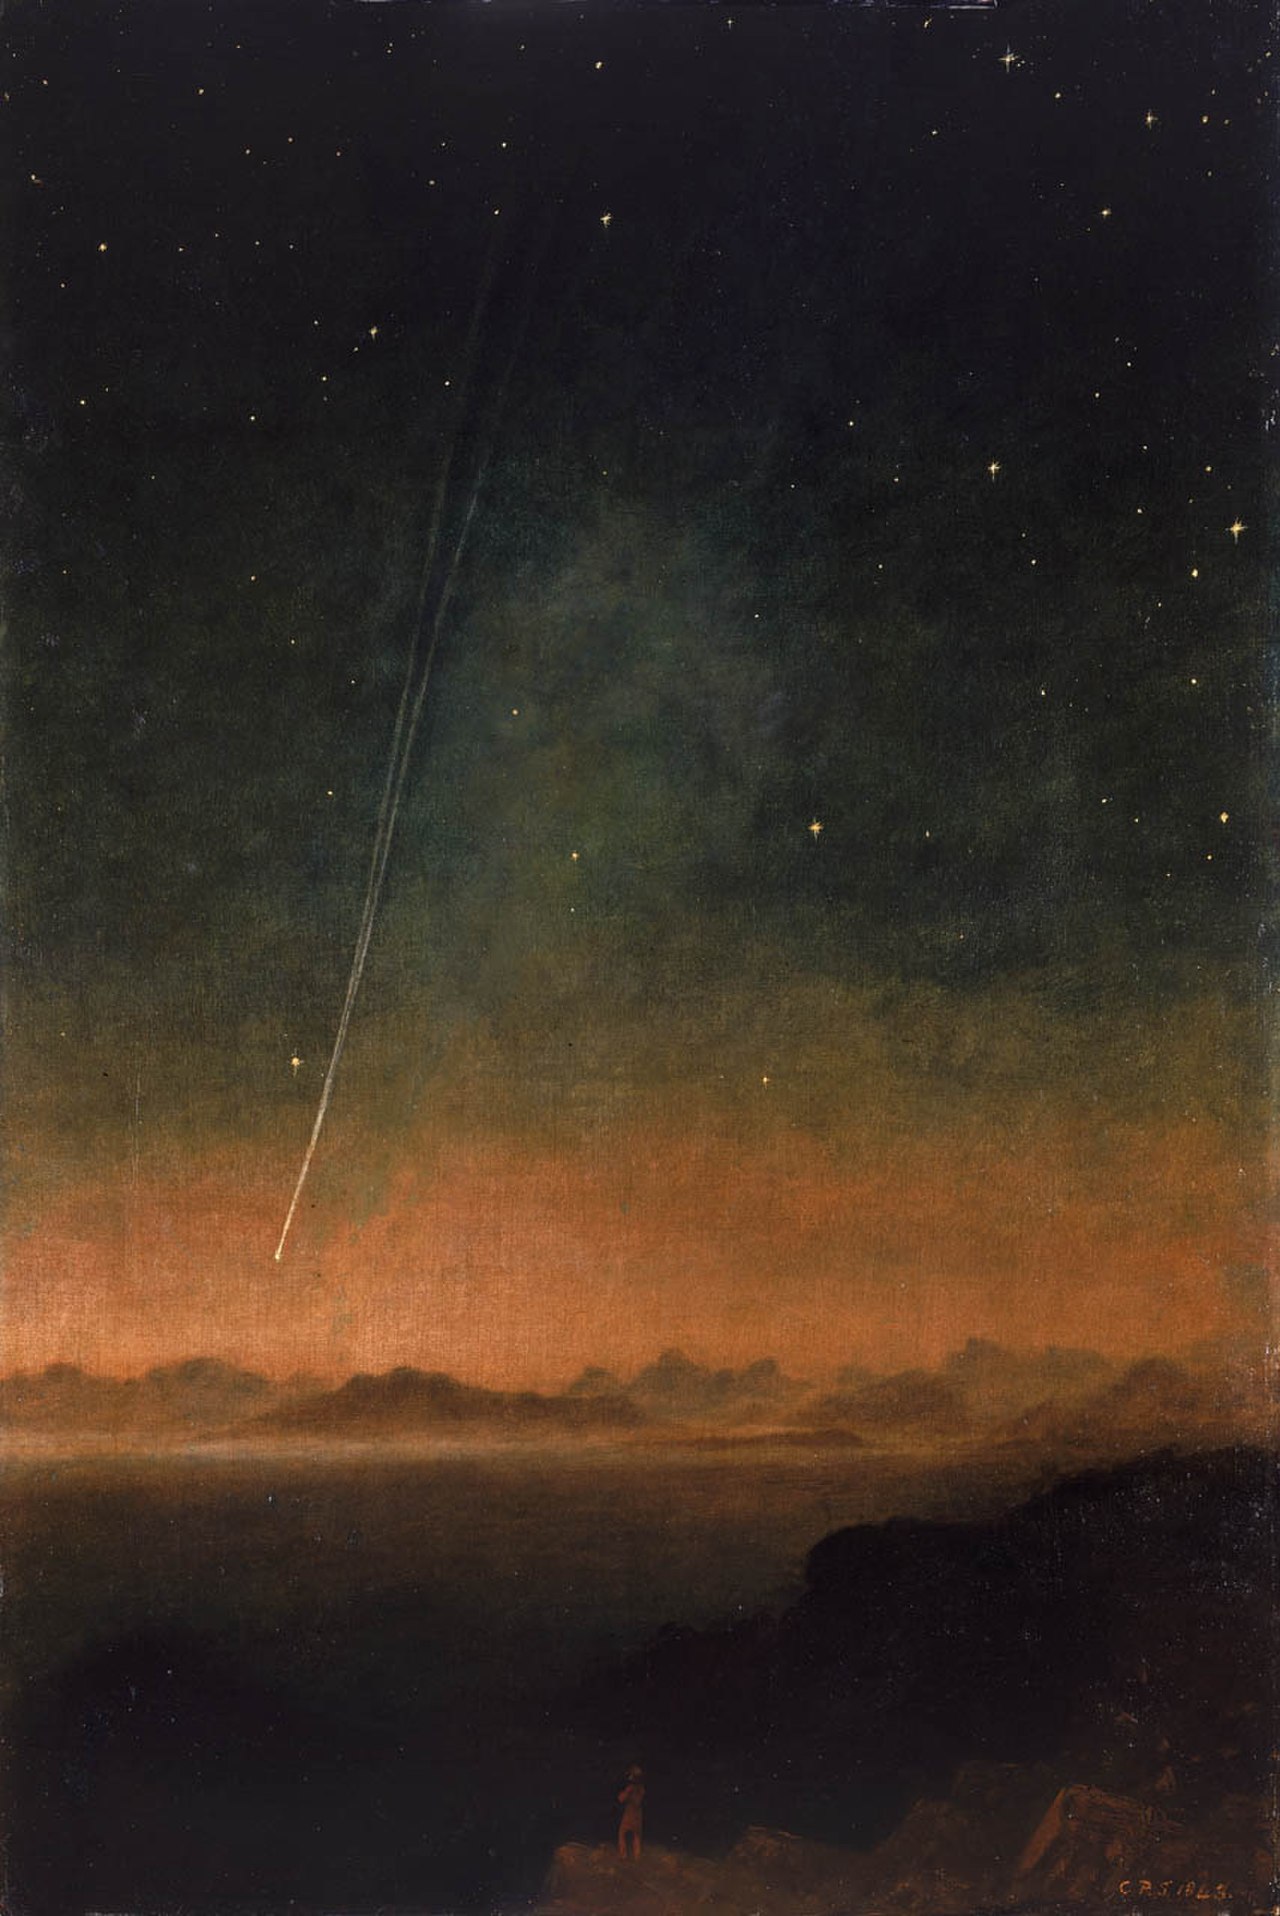 The Great Comet of 1843 by Charles Piazzi Smyth - 1843 - 105.2 x 75.3 cm National Maritime Museum